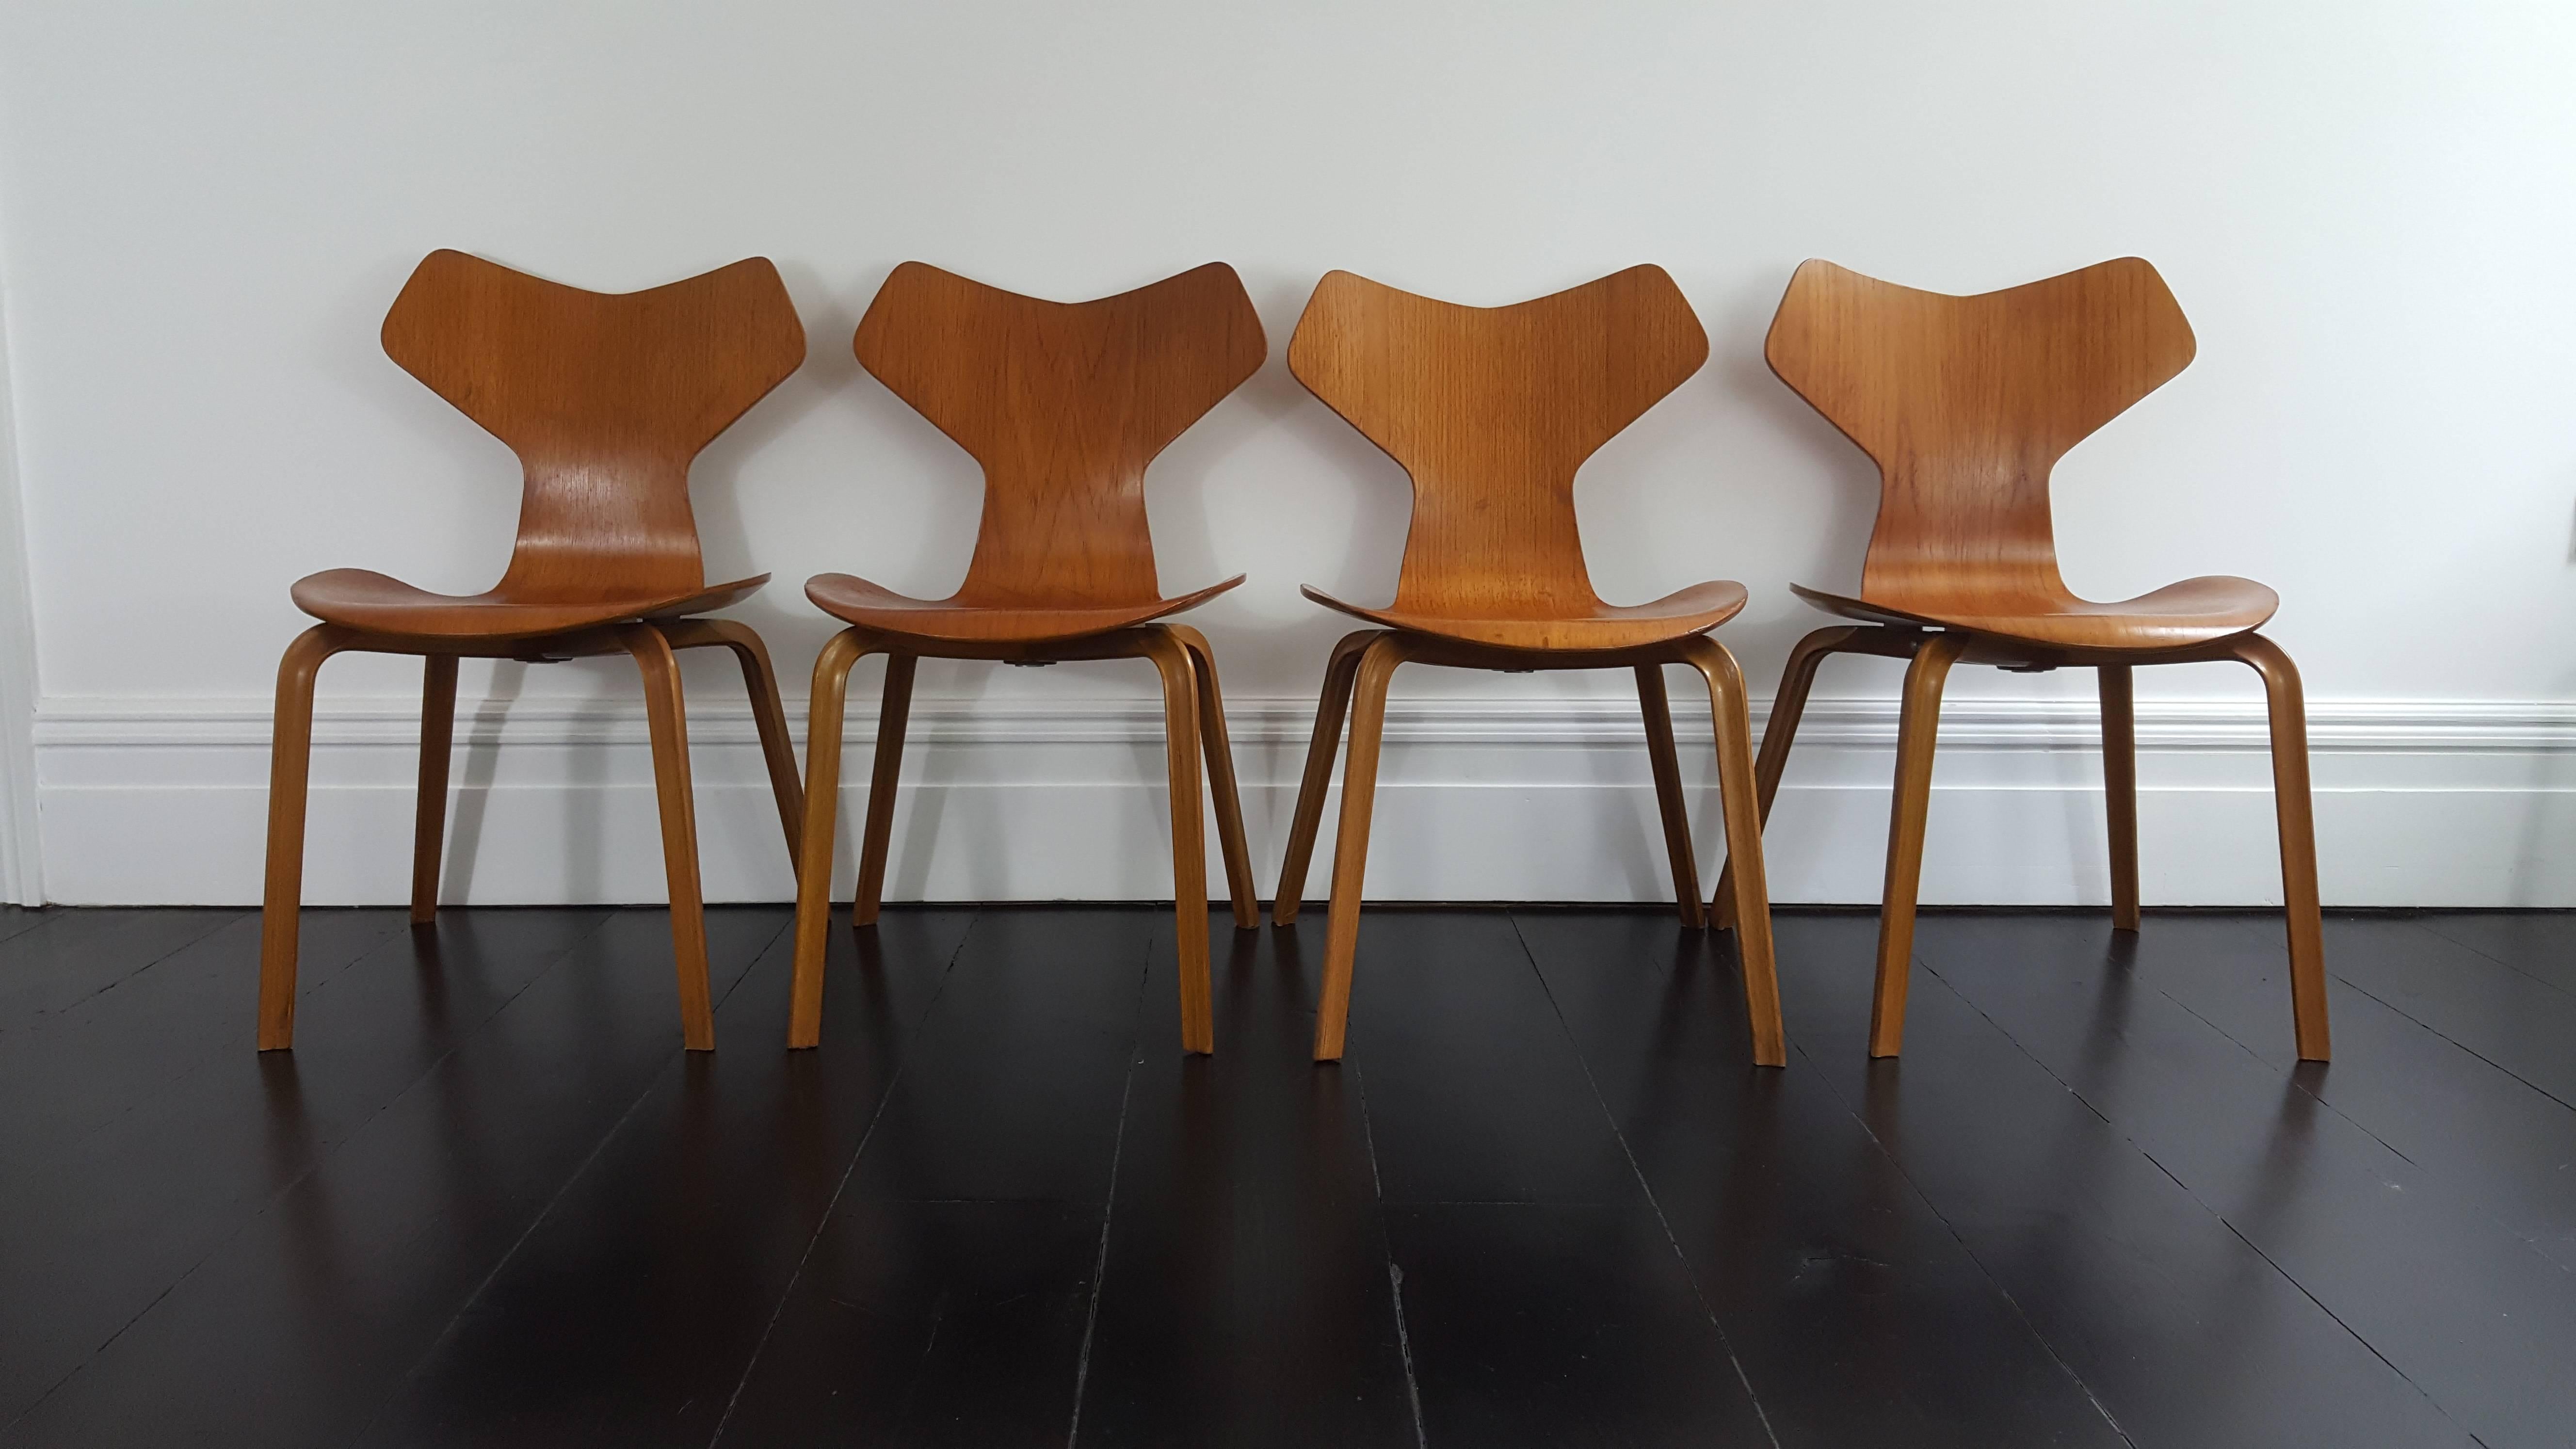 Iconic Model 3130 Grand Prix chair by Arne Jacobsen for Fritz Hansen, 1960s. 

Model 3130 was introduced by Fritz Hansen in 1957 at the Designers' spring exhibition (Kunsthaandværkernes Foraarsudstilling). Later that year, the chair was awarded